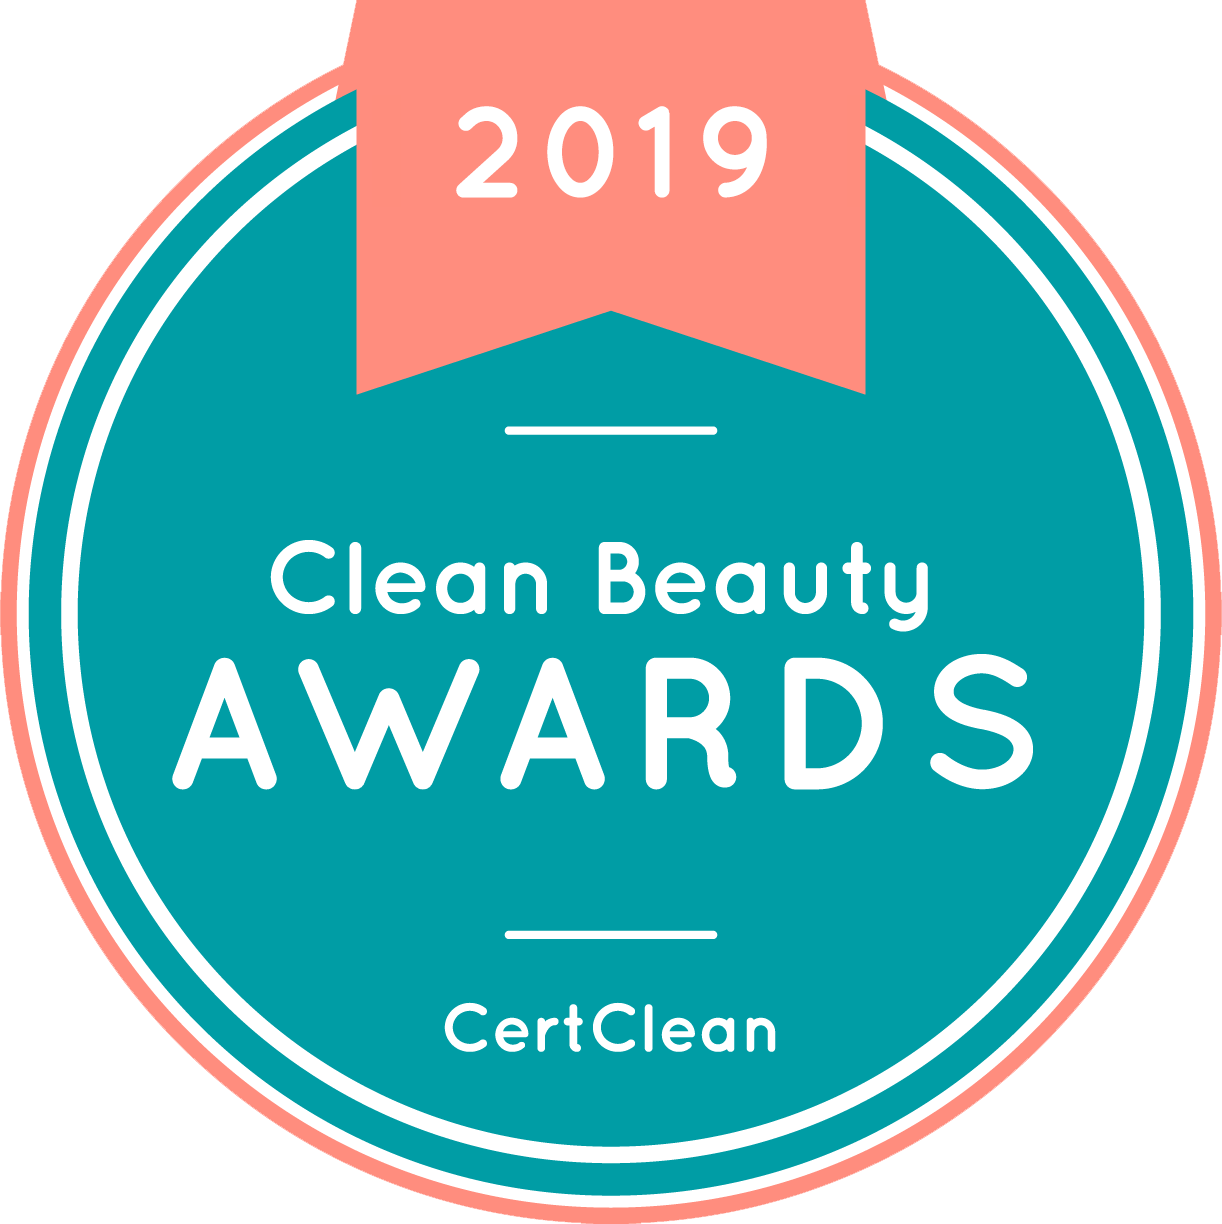 This Week I’ve Been Judging the "Clean Beauty Awards"